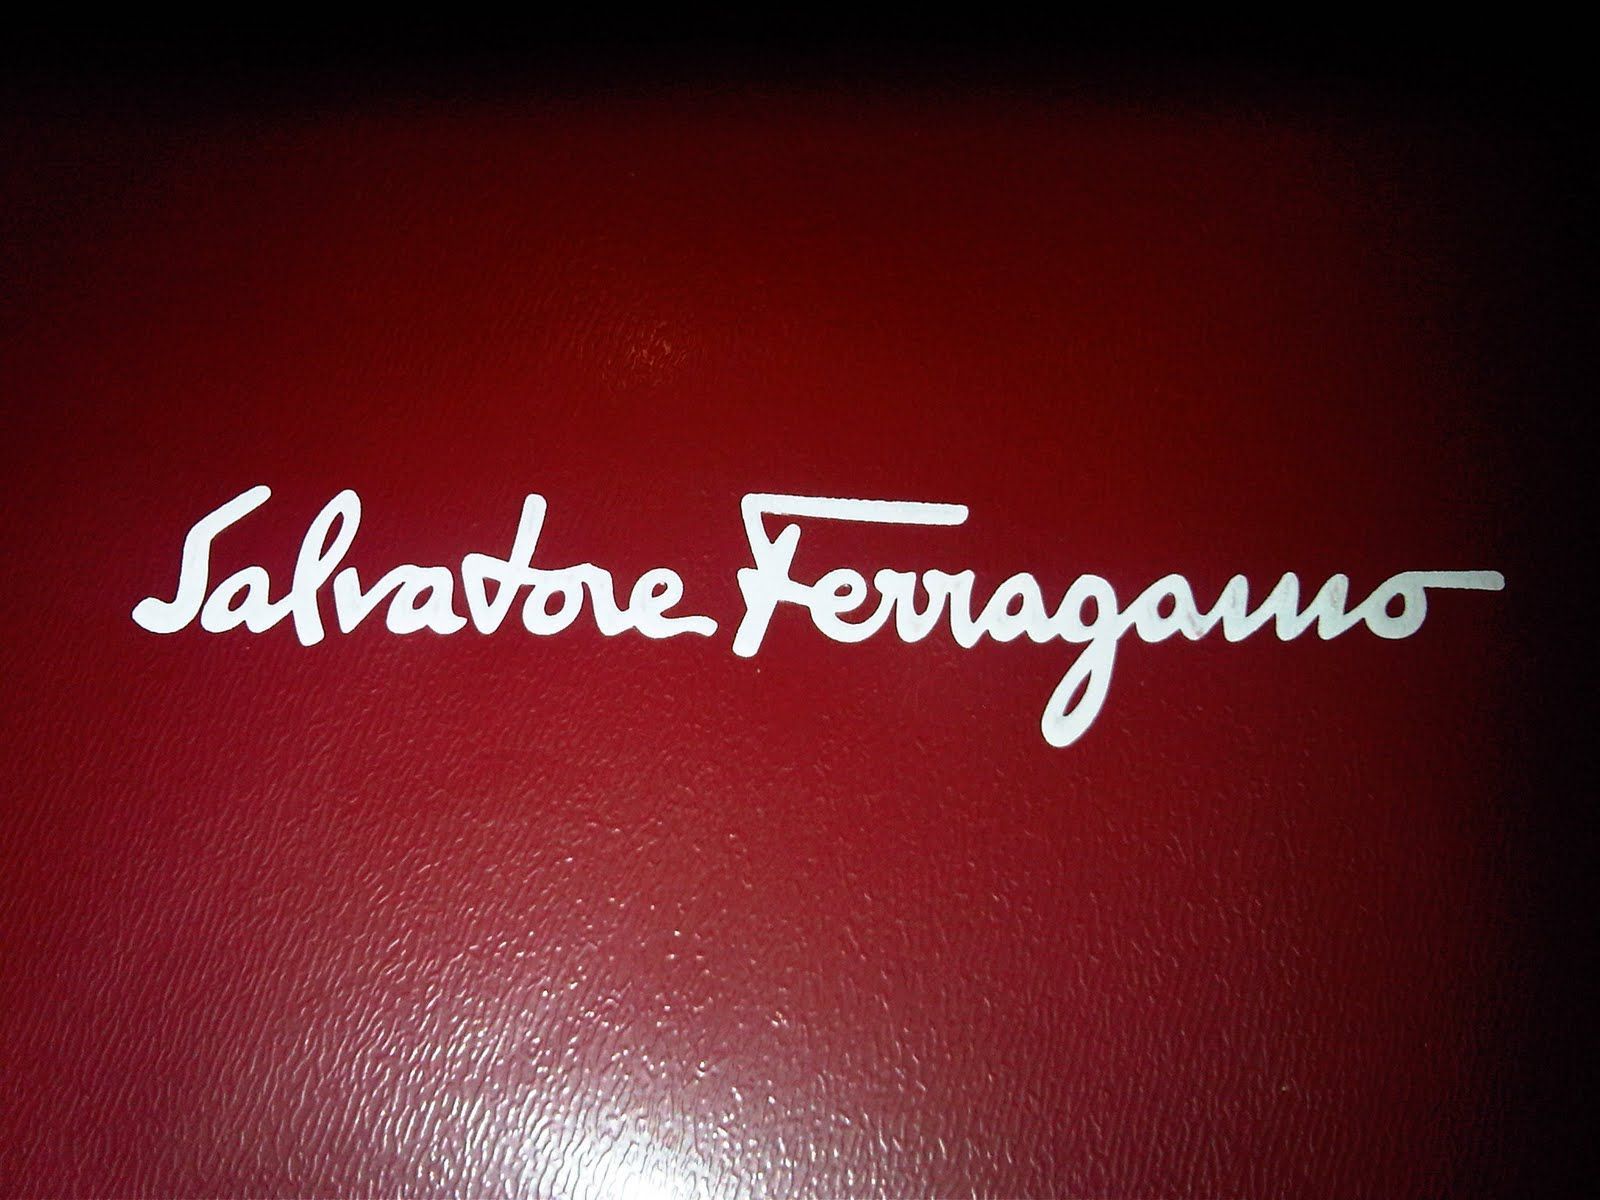 Recommended Wallpapers - Background Ferragamo , HD Wallpaper & Backgrounds